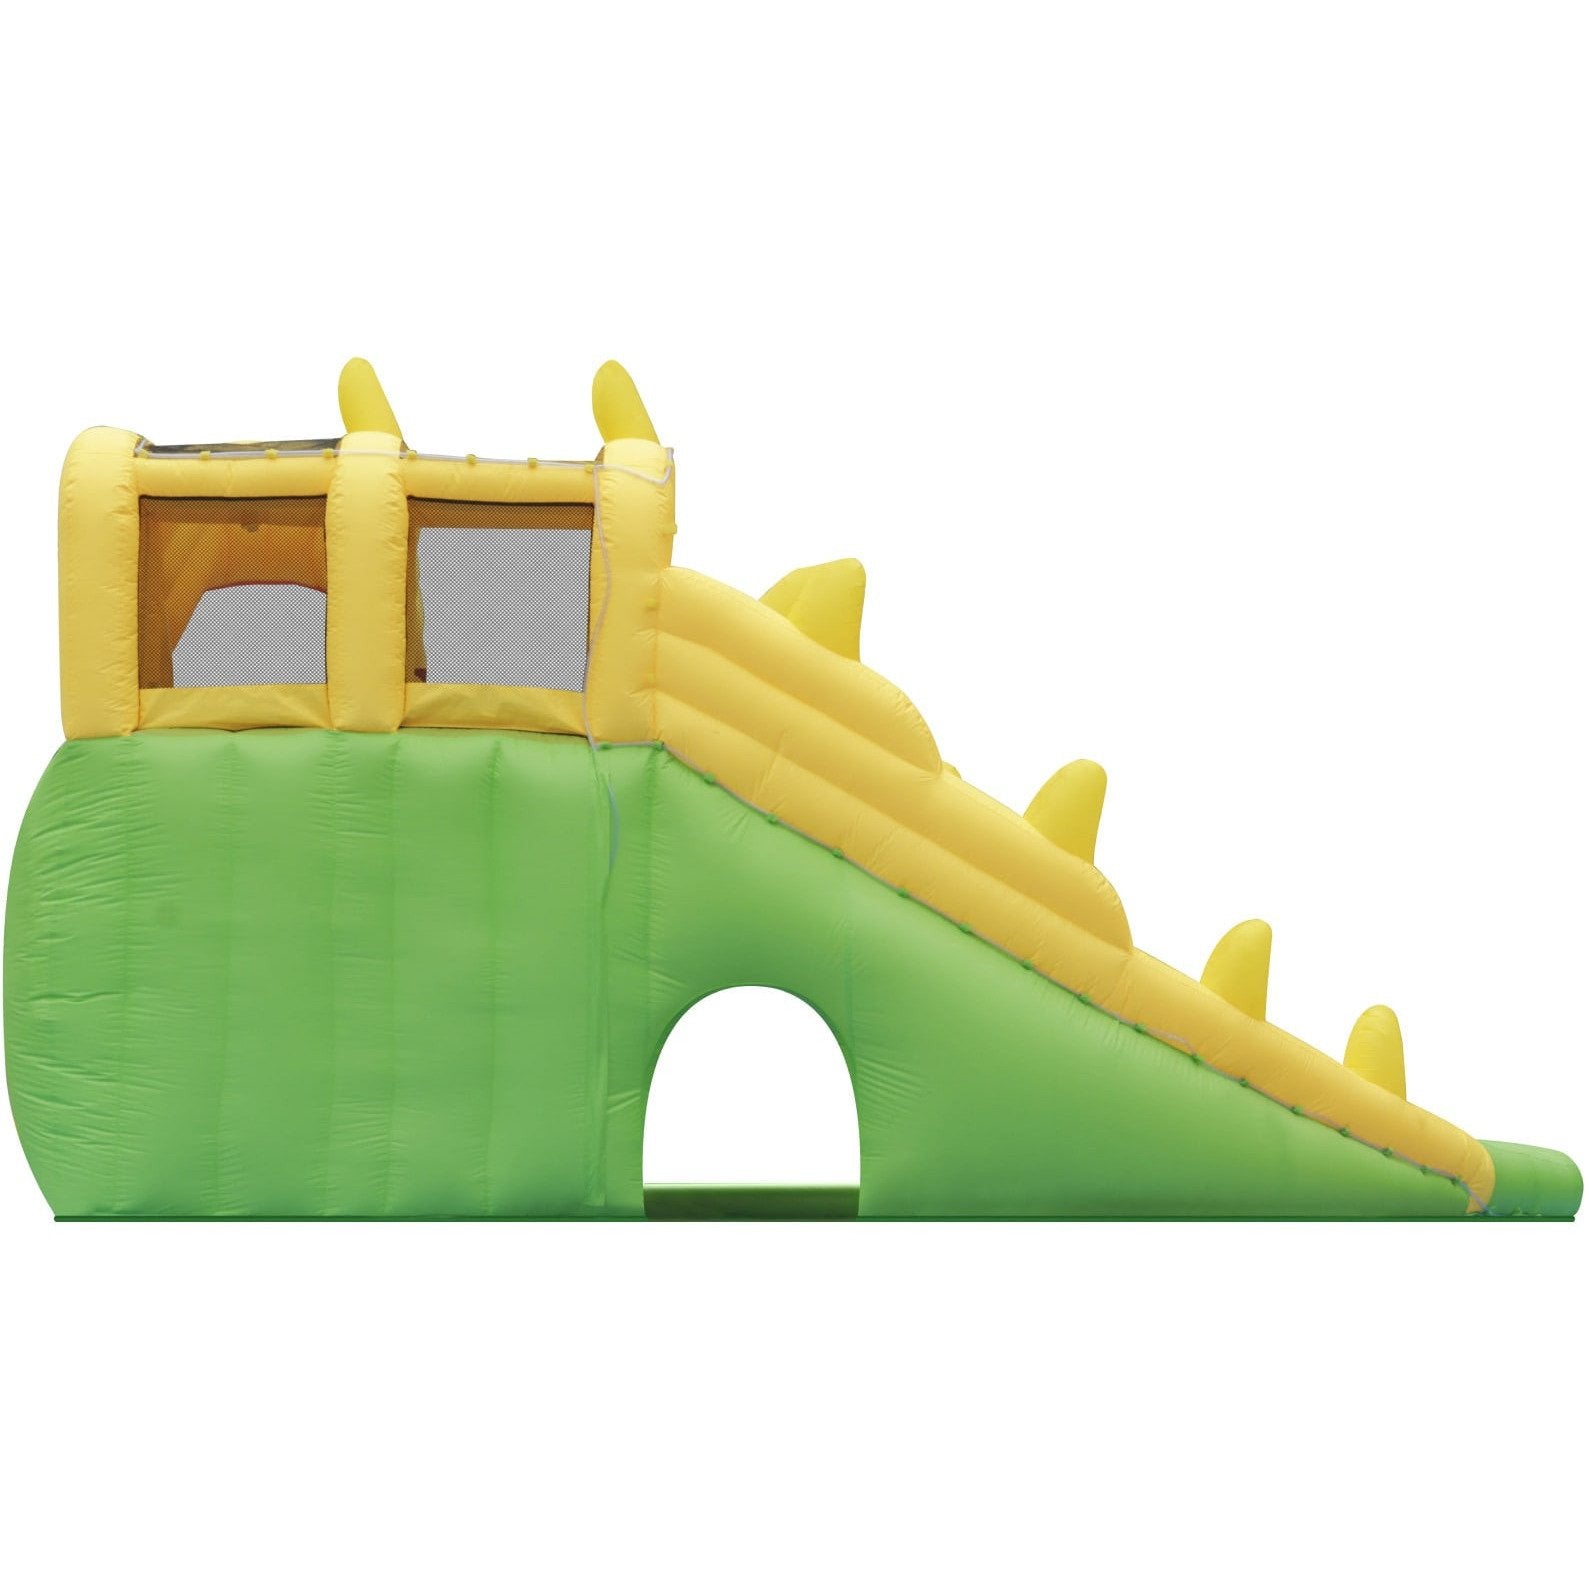 Kidwise Residential Bounce House KidWise Dinosaur Rapids Back to Back® Water Park KWWS-DINO-WP